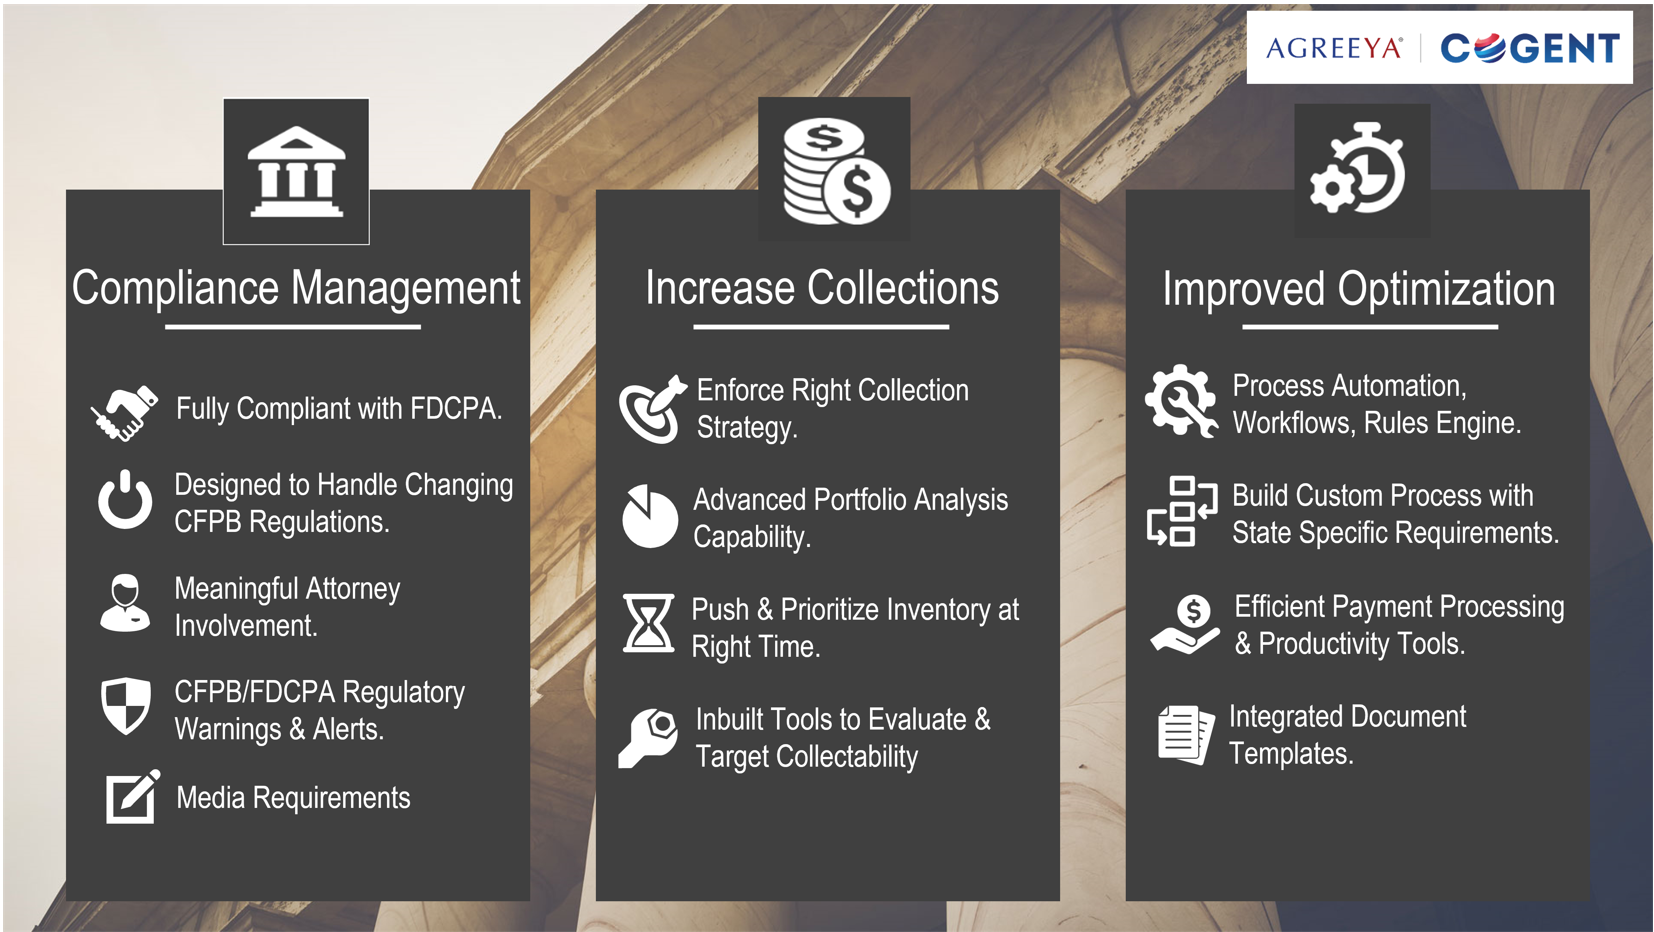 COGENT provides operational benefits by automating processes such as collections, litigation, judgment, customer interaction, payment plan allocation and posting. It also integrates with number of vendor services offering greater operational flexibility